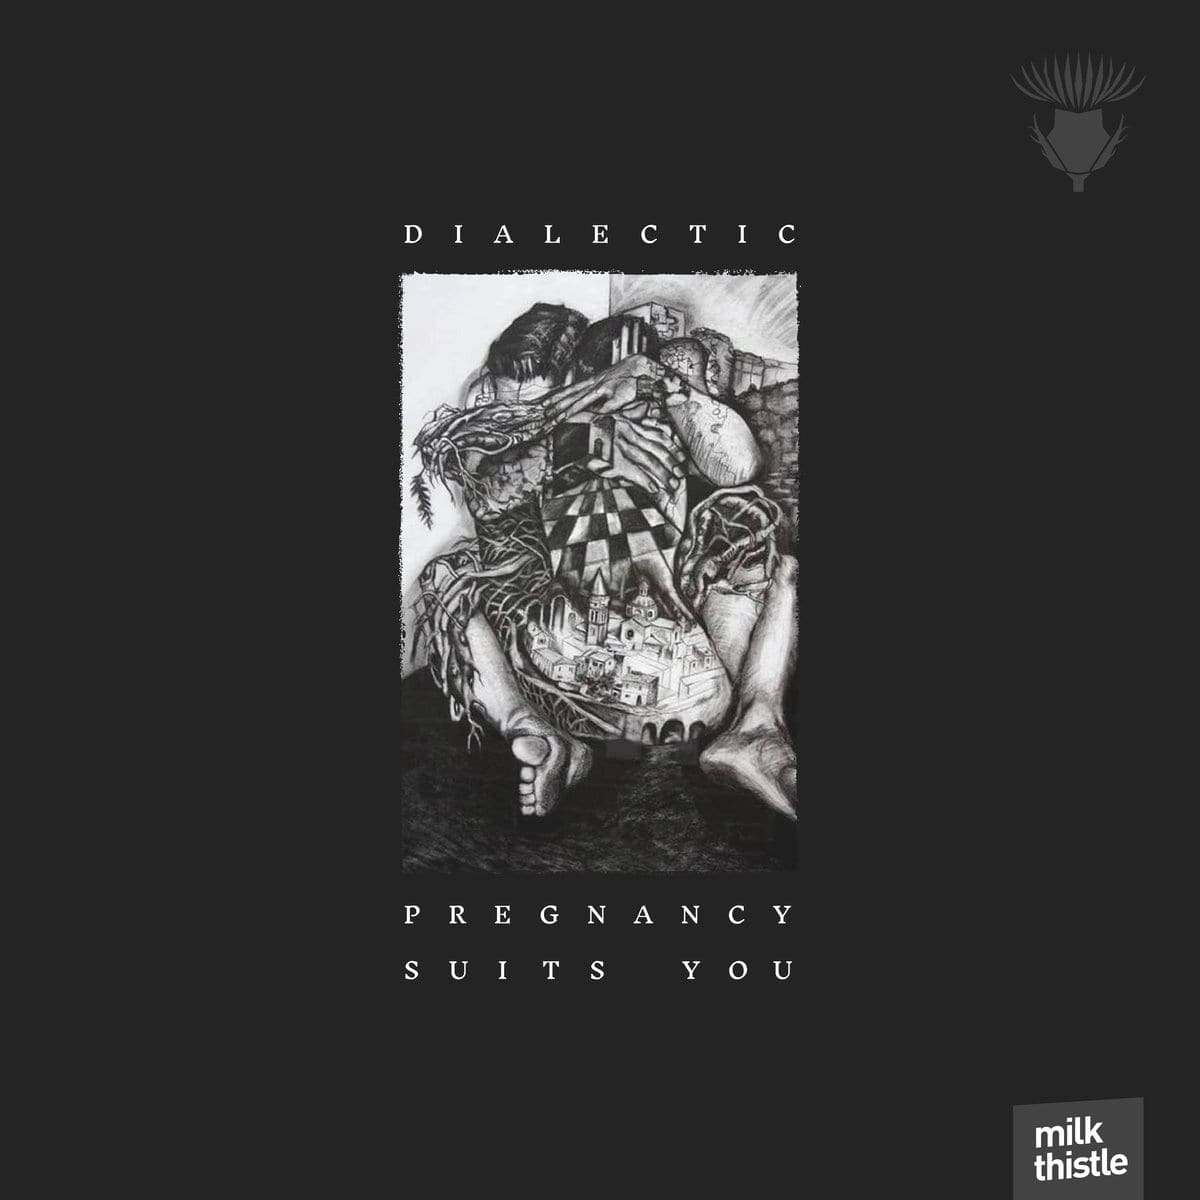 Pregnancy Suits You: the remarkable debut EP from Dialectic in review